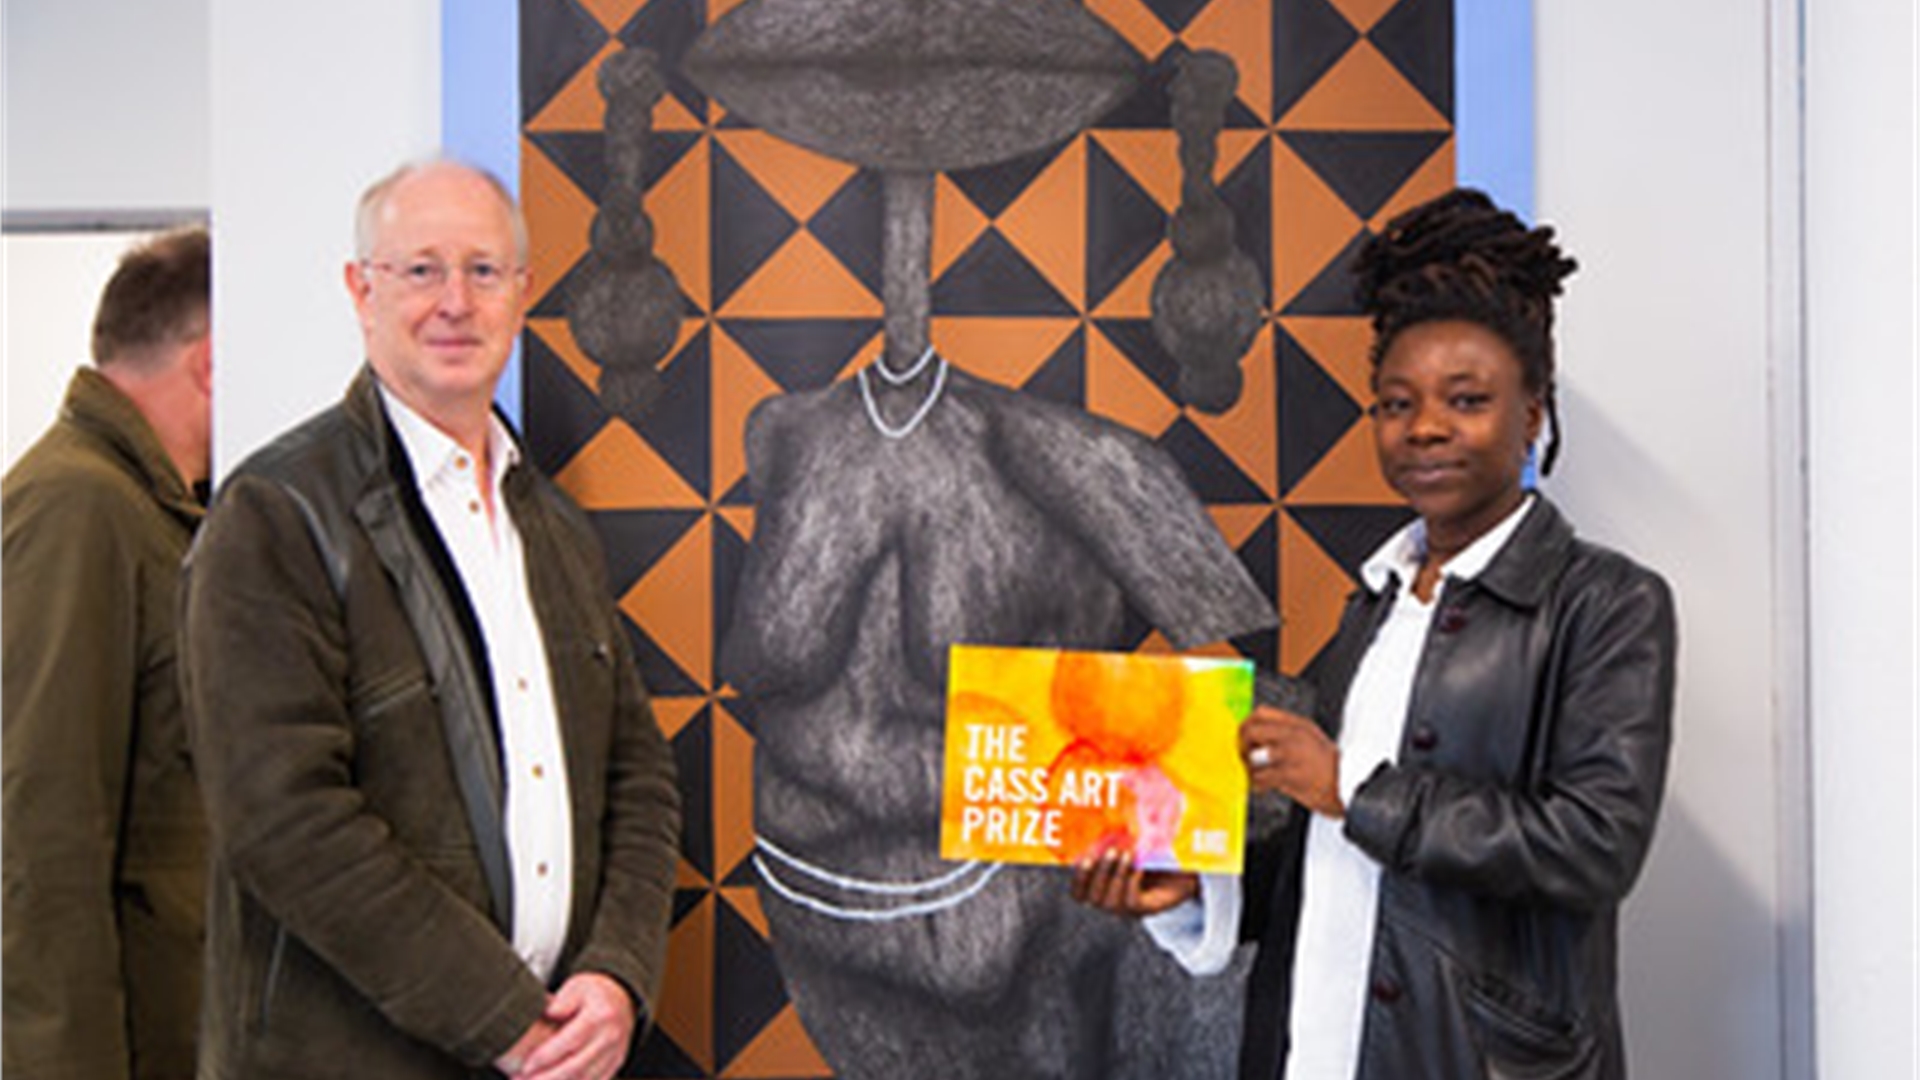 The Arts Programme team works in partnership with forward thinking charities, organisations, companies and brands on exciting collaborations that support UAL students.